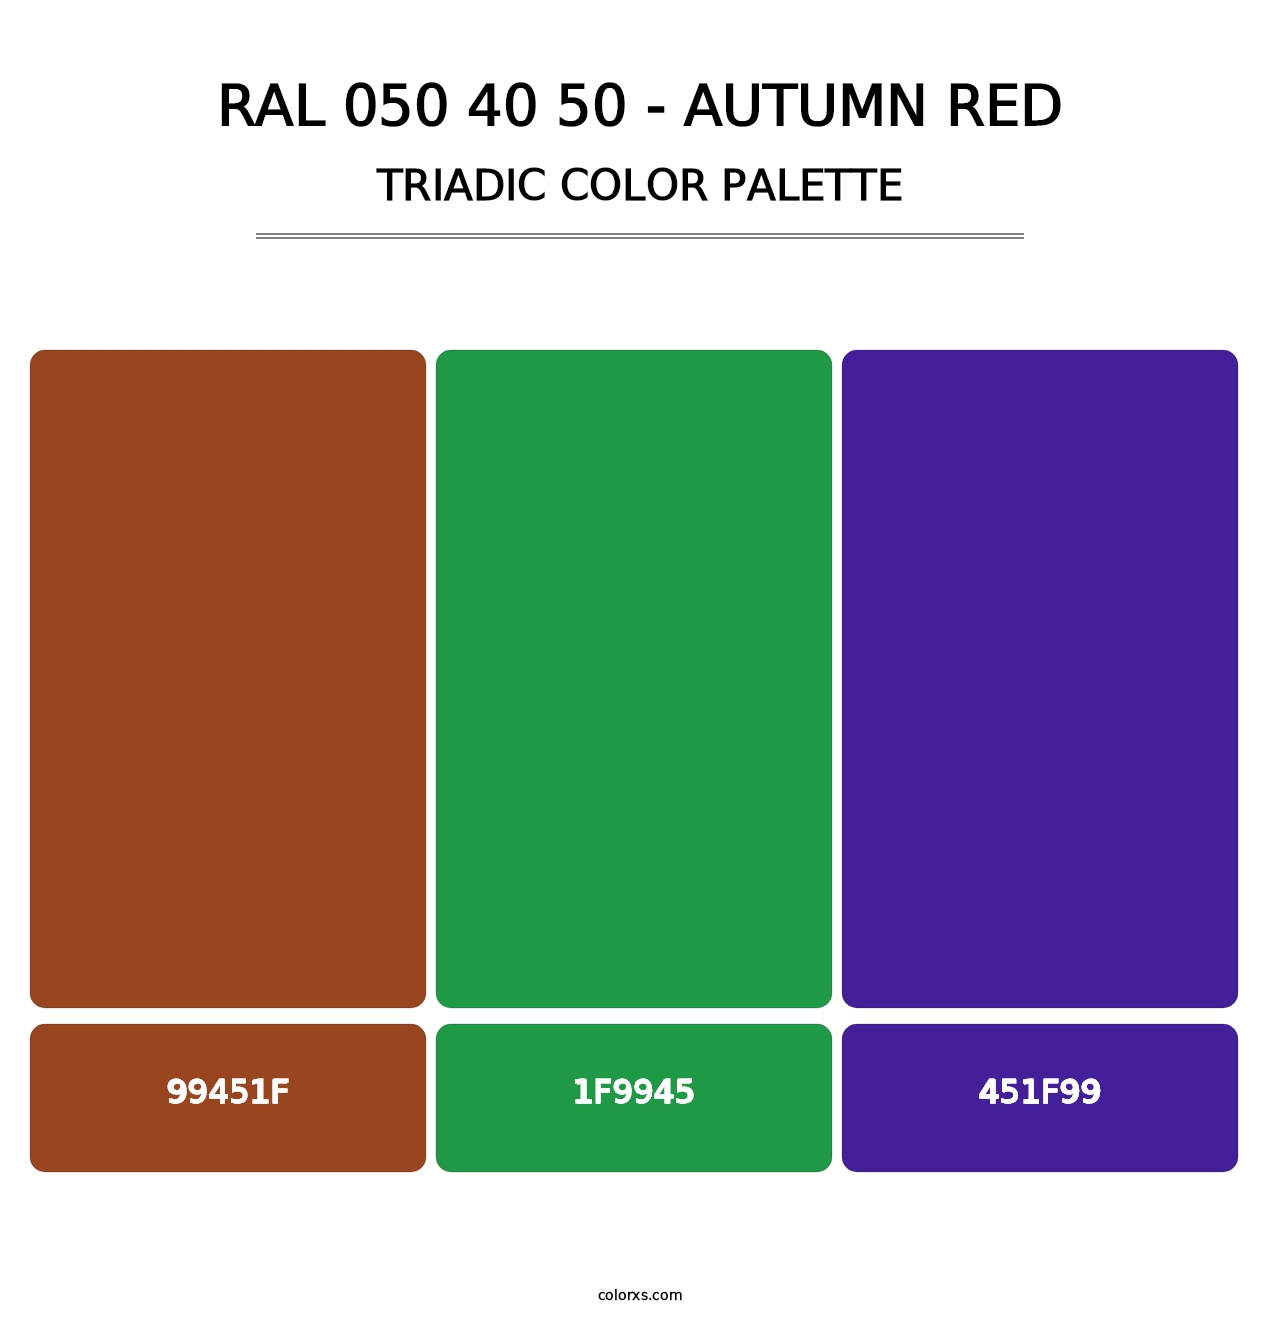 RAL 050 40 50 - Autumn Red - Triadic Color Palette